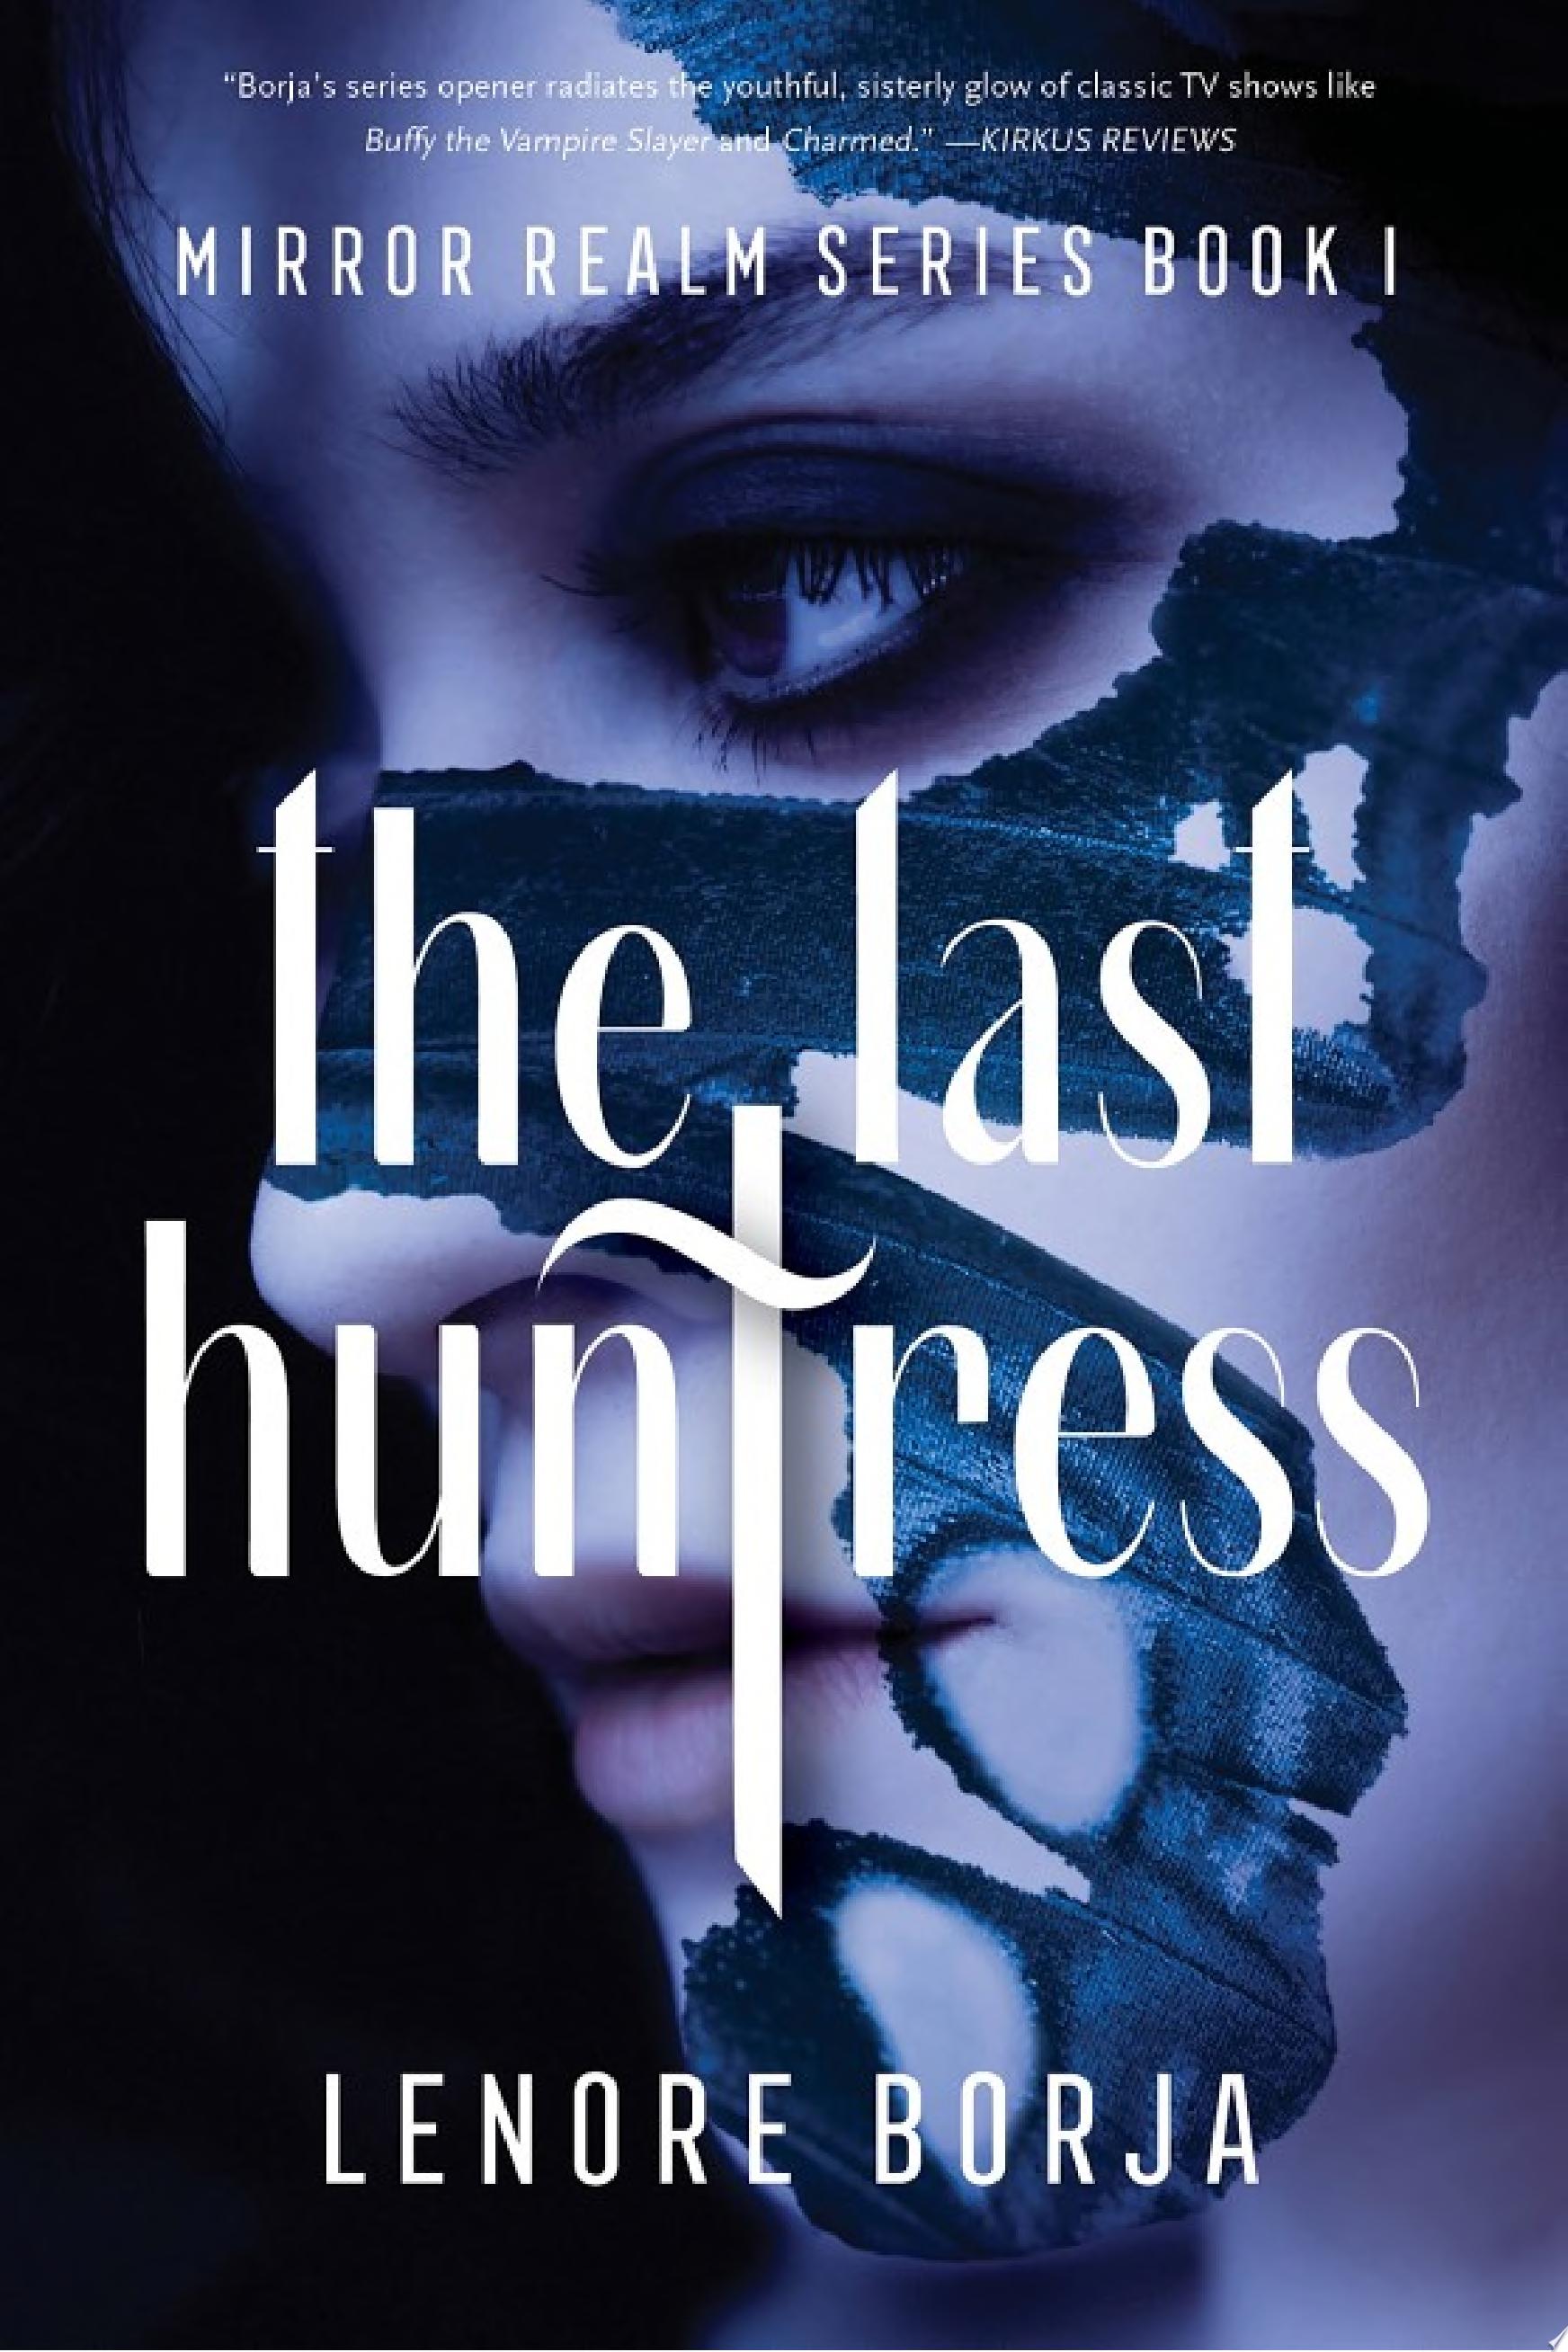 Image for "The Last Huntress"